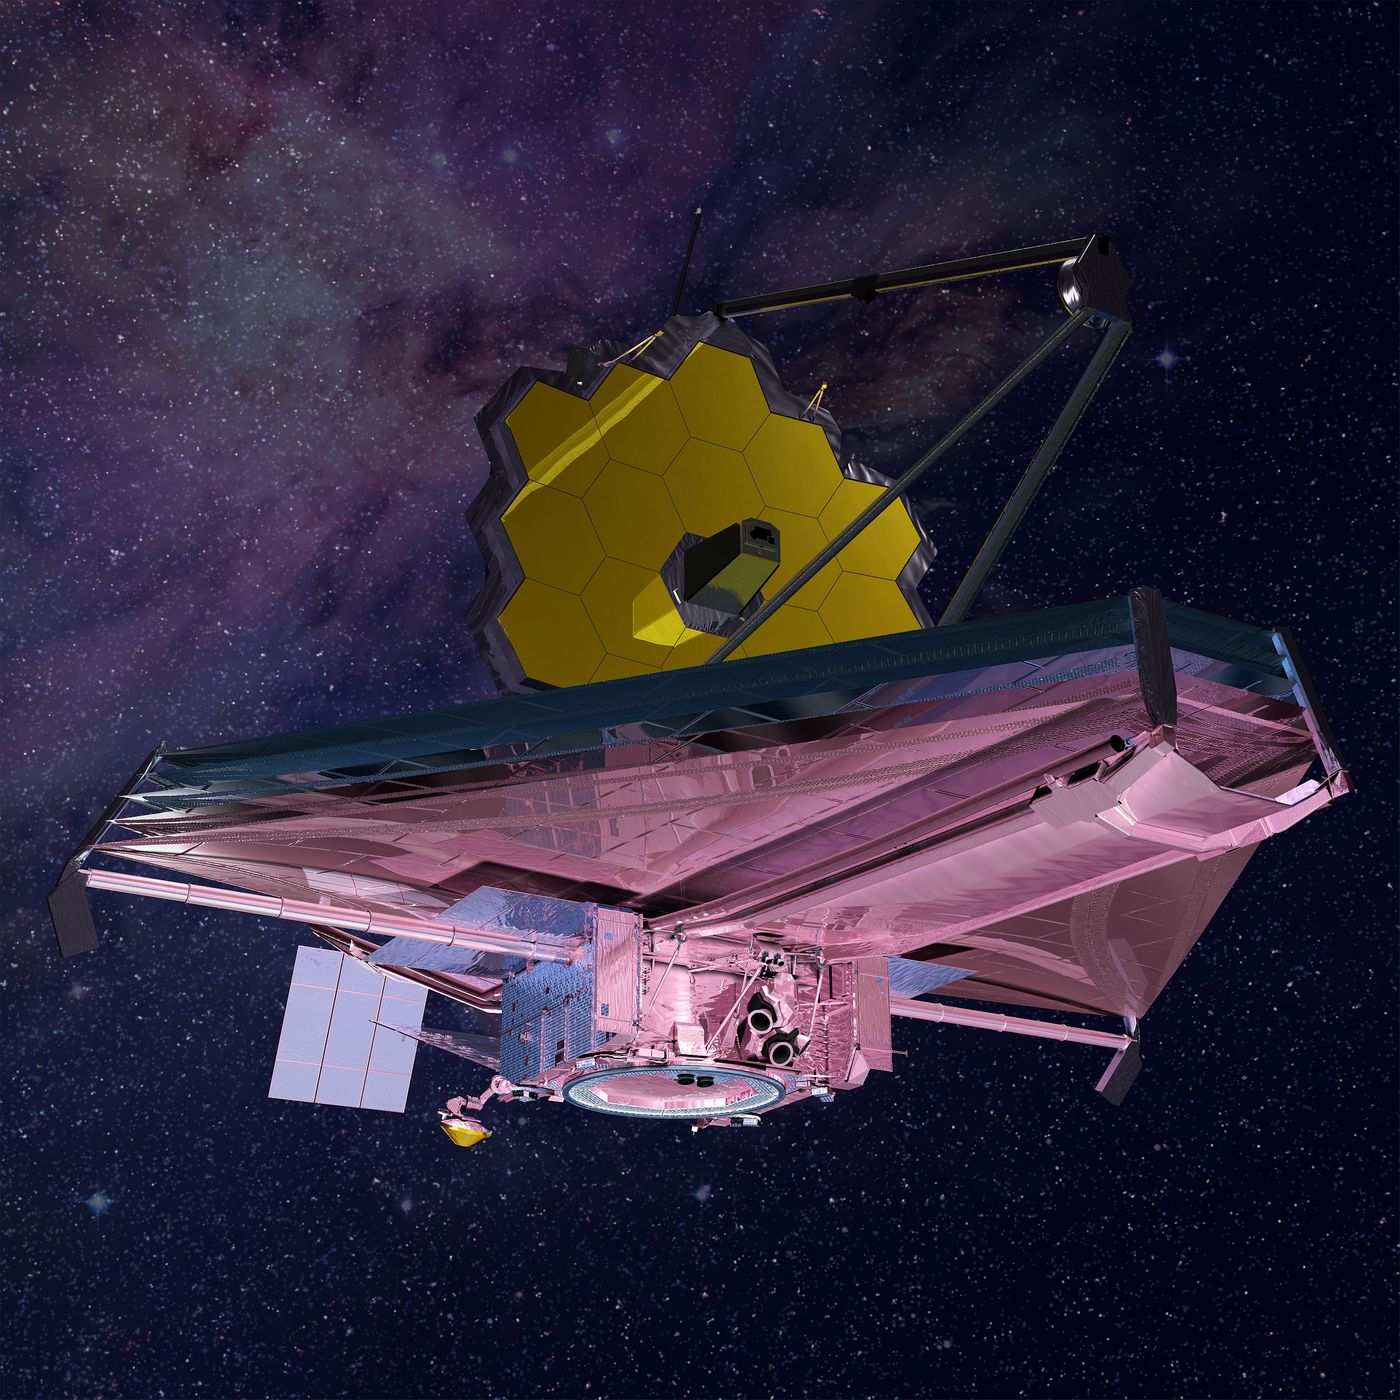 An artist's impression of the James Webb Space Telescope, set for launch in 2018.